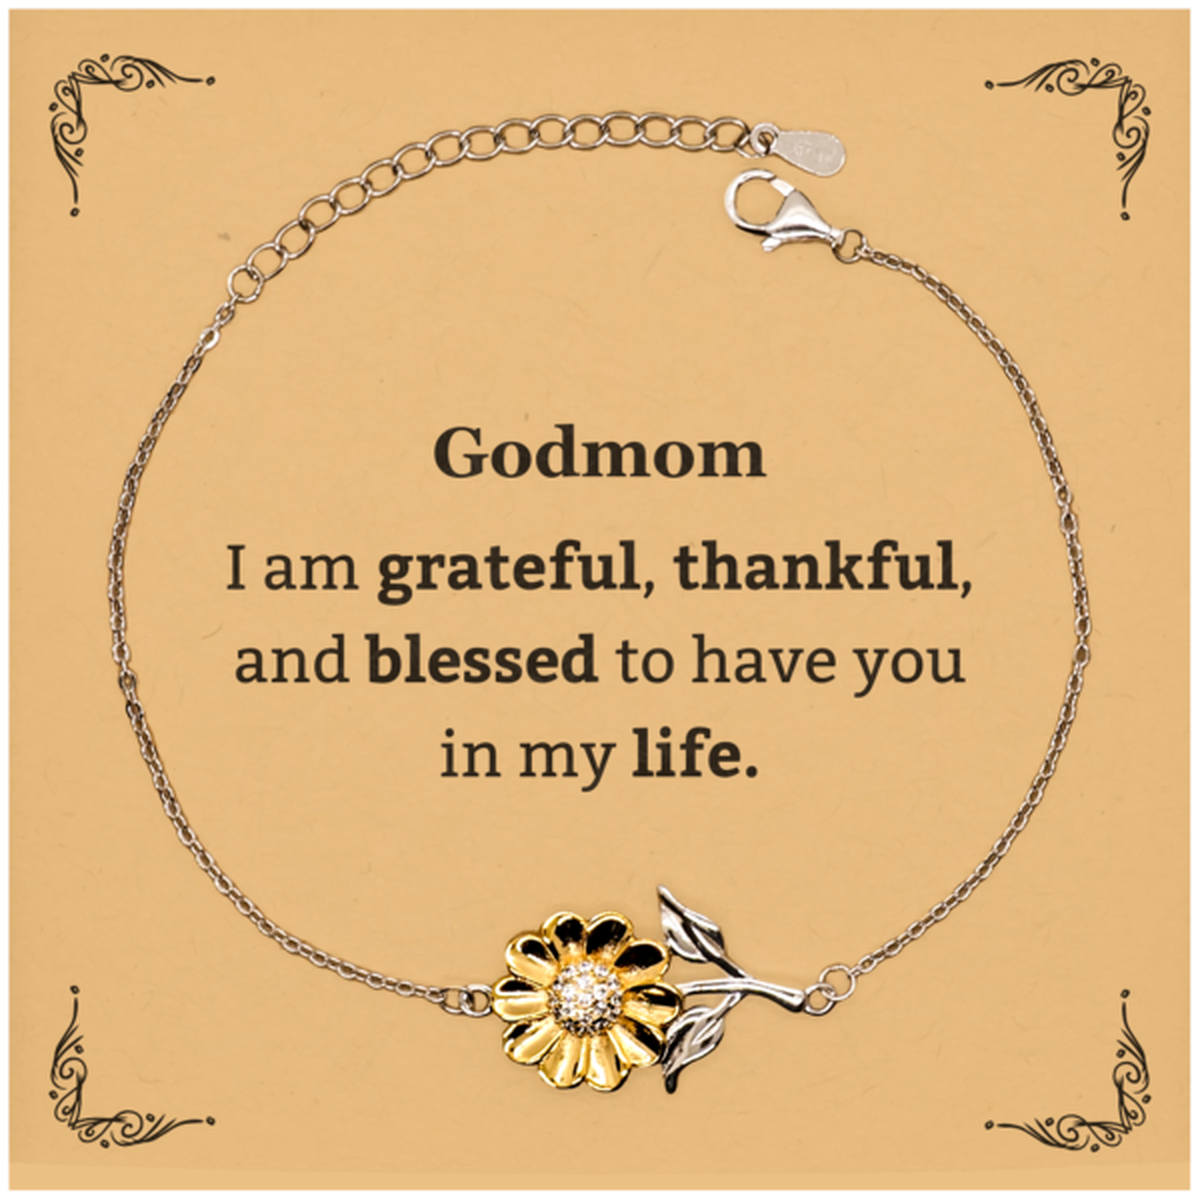 Godmom Appreciation Gifts, I am grateful, thankful, and blessed, Thank You Sunflower Bracelet for Godmom, Birthday Inspiration Gifts for Godmom